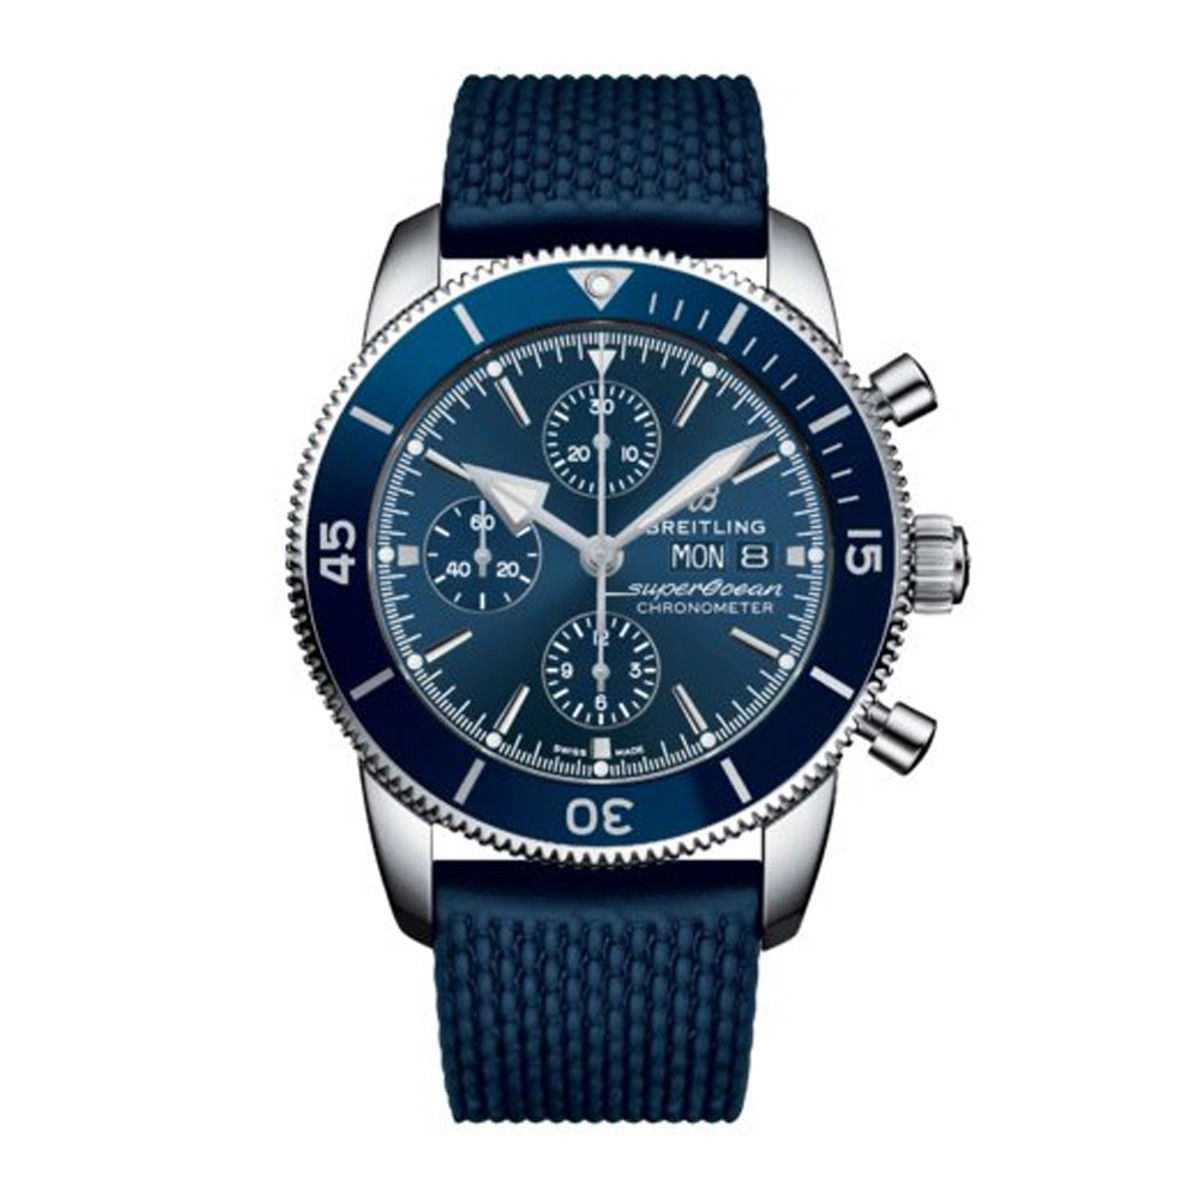 Breitling Superocean 44 Heritage Automatic Chronograph A13313161C1S1-WBTG1795 Product Image